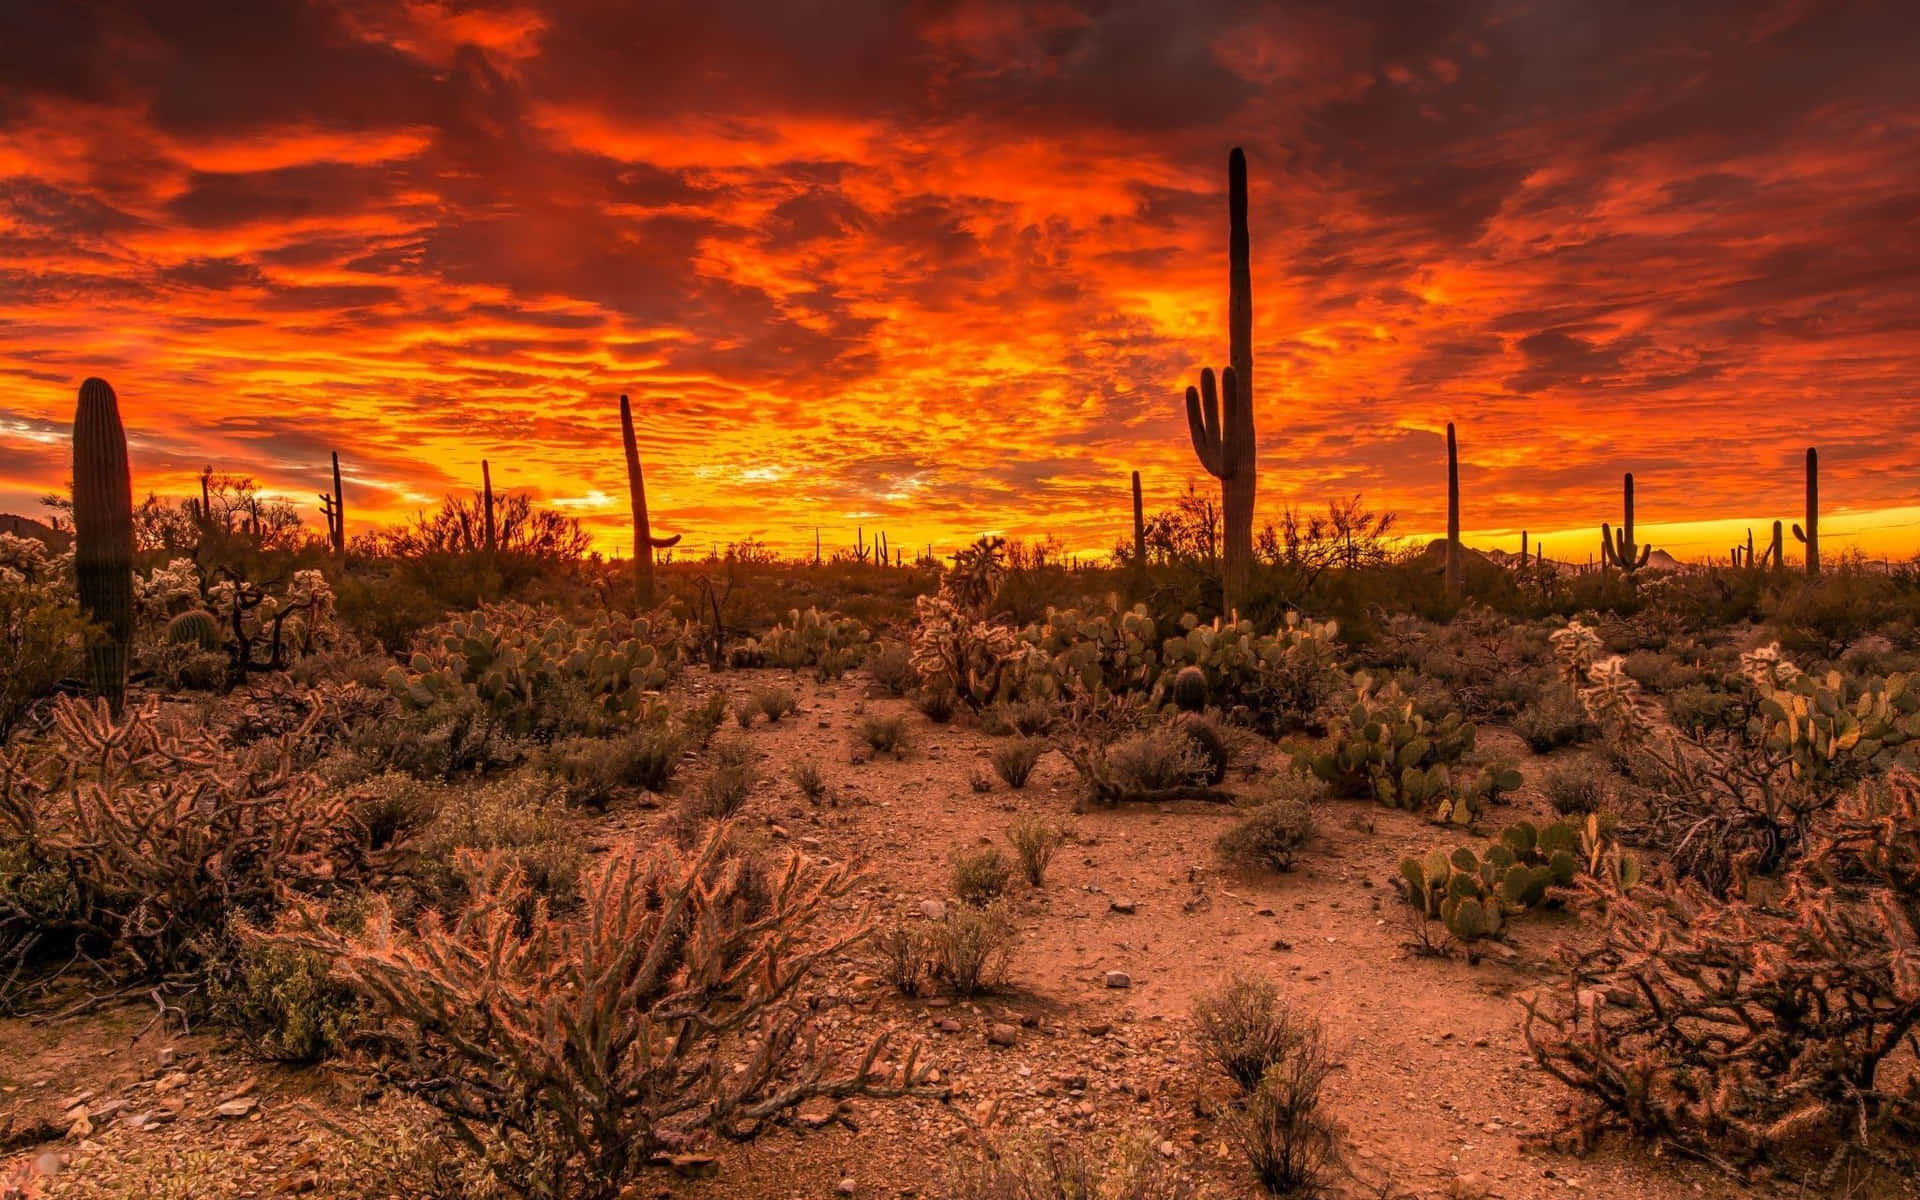 Enjoy the beauty of Arizona's deserts and mountains